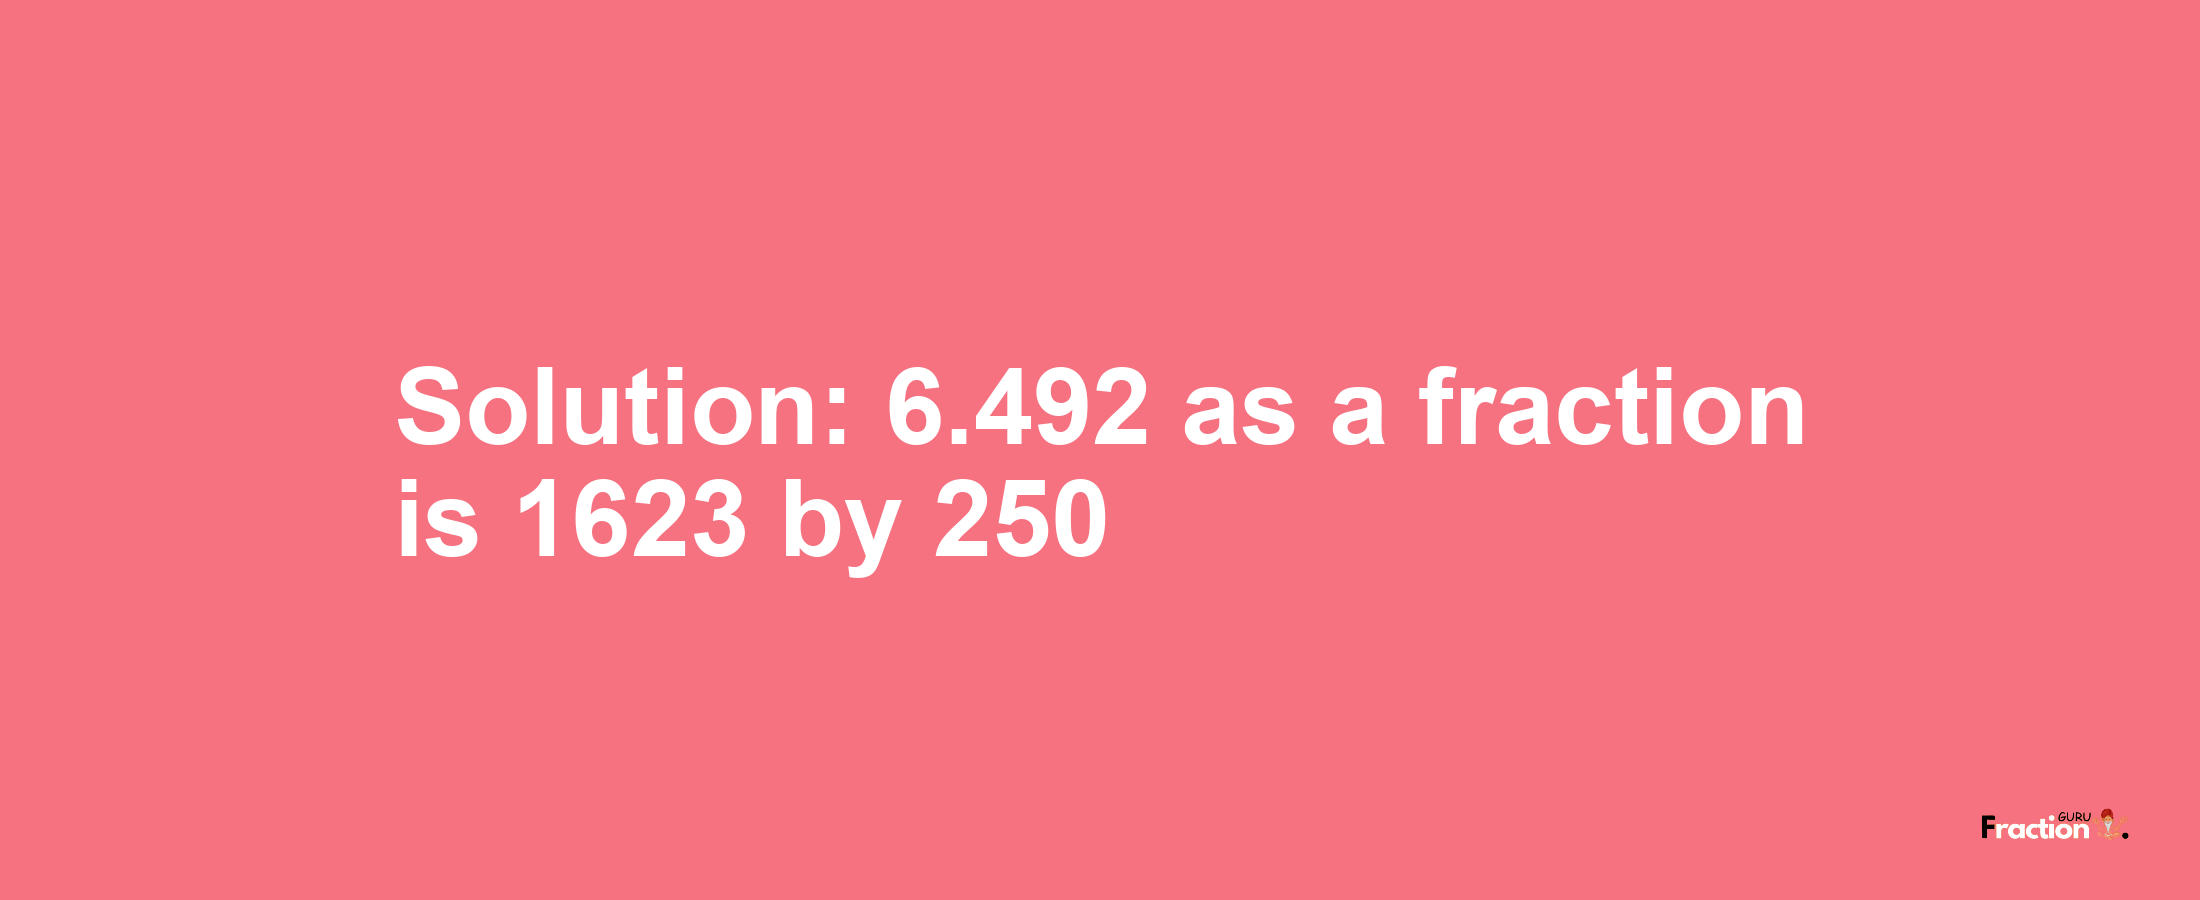 Solution:6.492 as a fraction is 1623/250